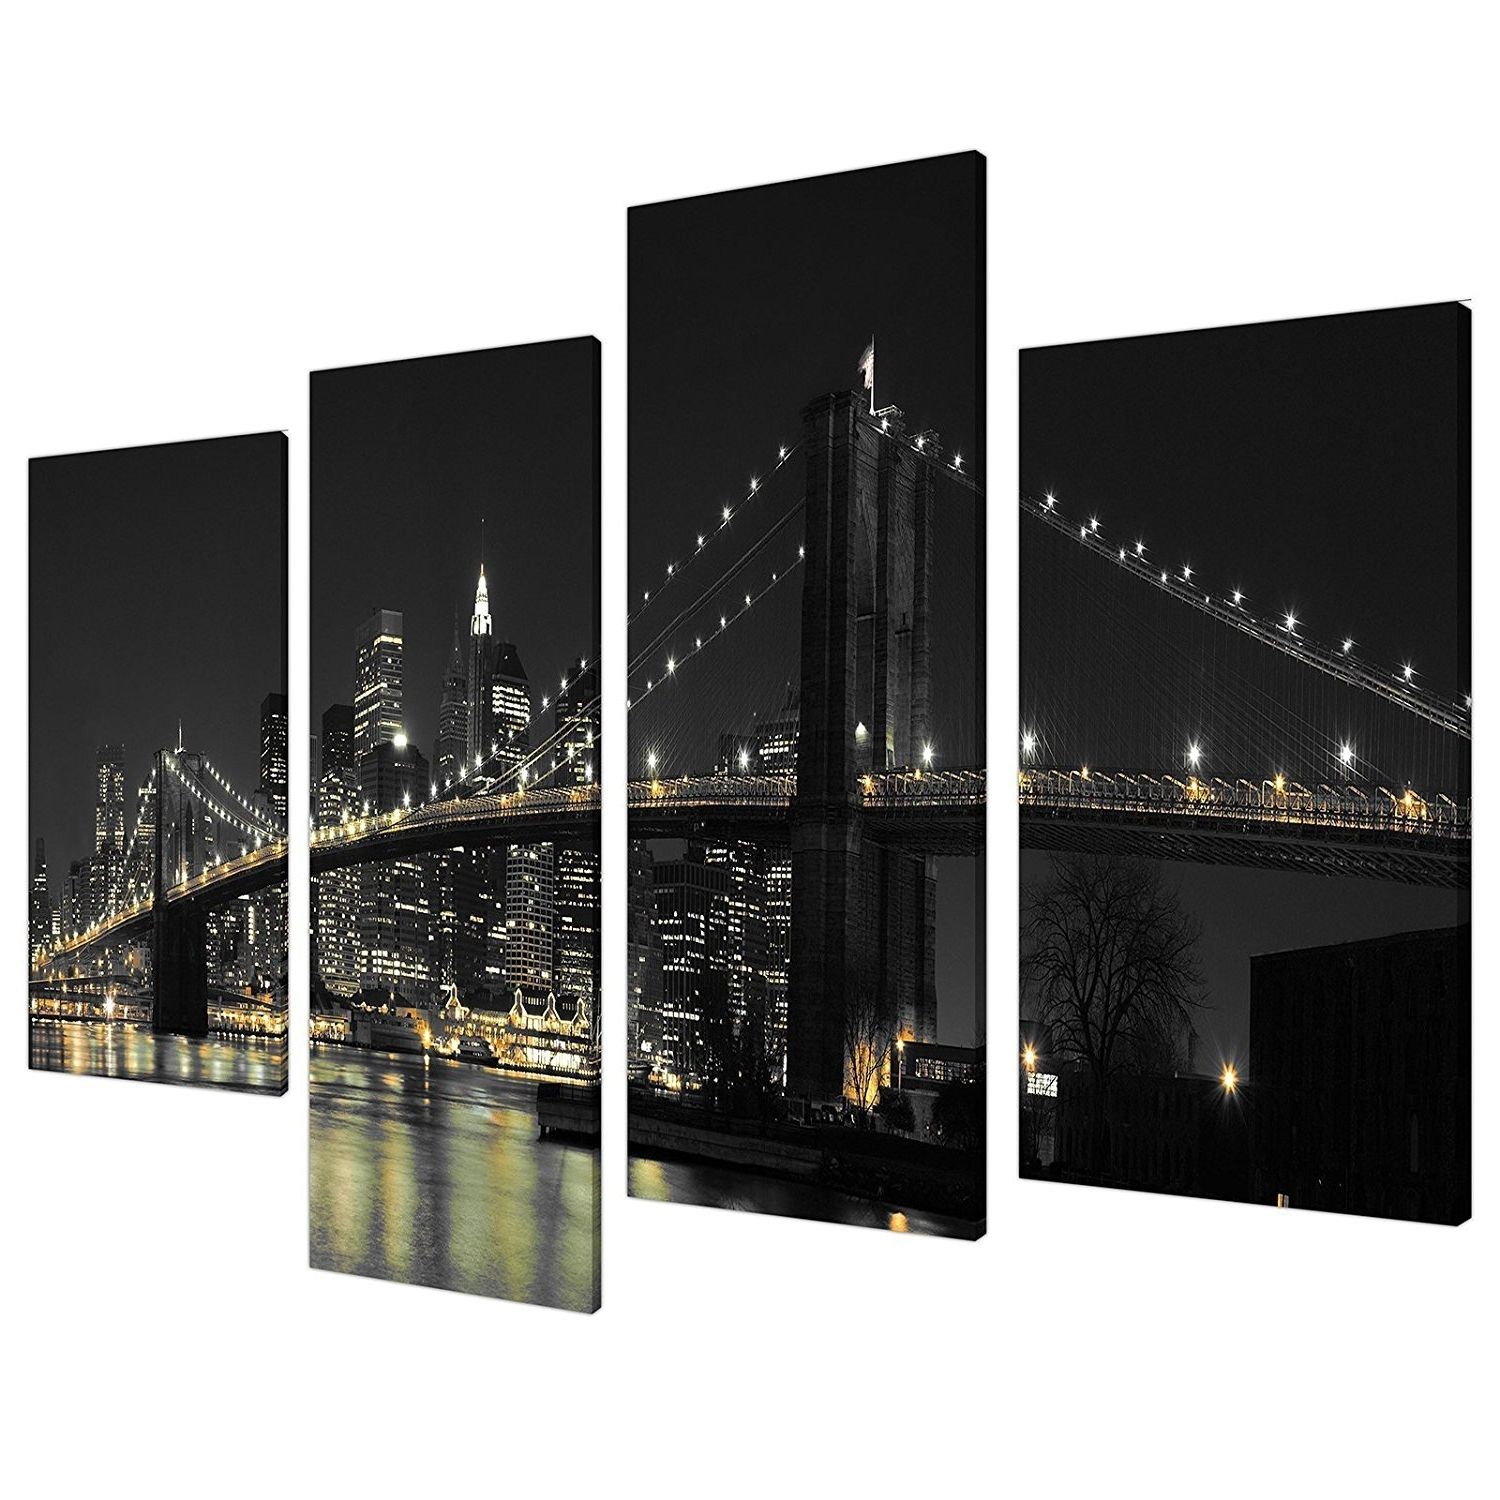 Well Known New York City Wall Art Intended For Amazon: Large New York City Canvas Wall Art Pictures Of Nyc (View 1 of 15)